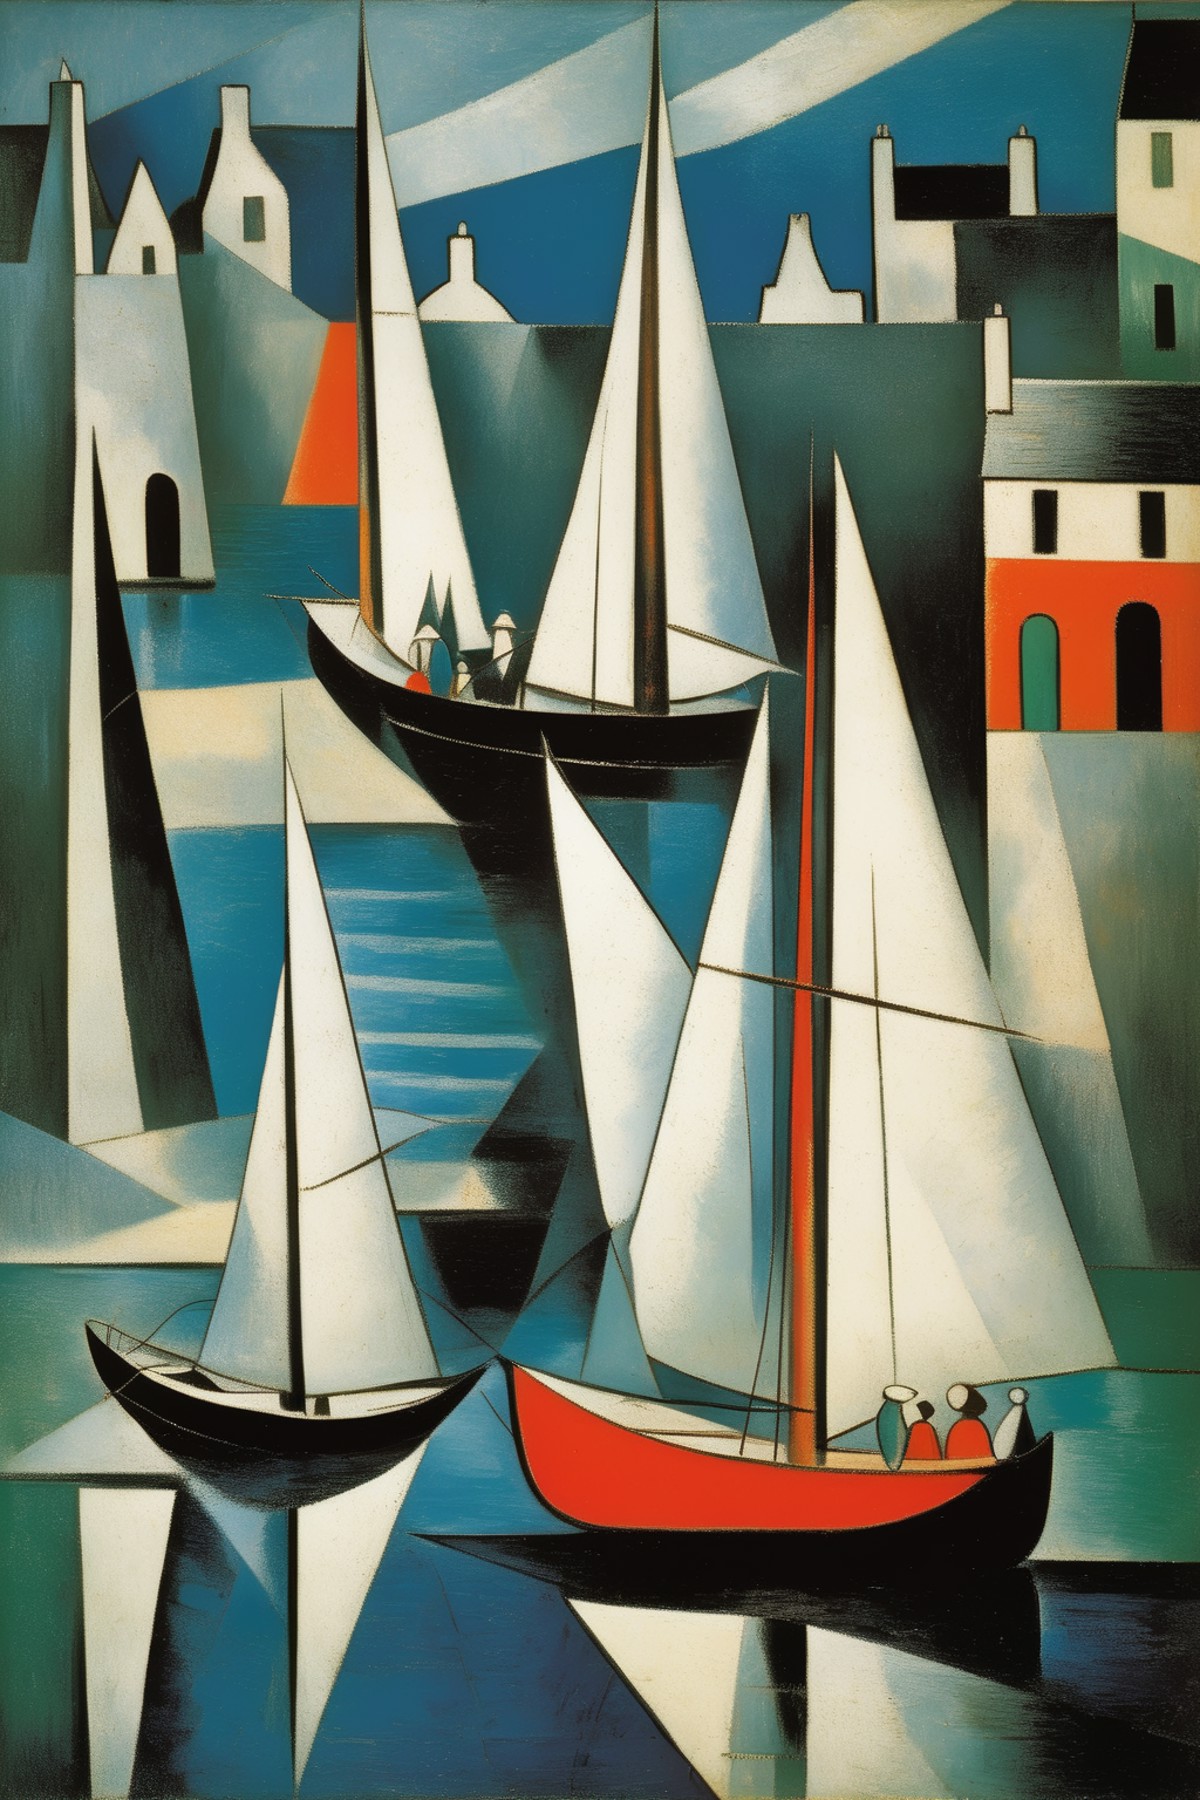 <lora:Lyonel Feininger Style:1>Lyonel Feininger Style - 102469. A painting by Pablo Picasso. A painting of sailing boats i...